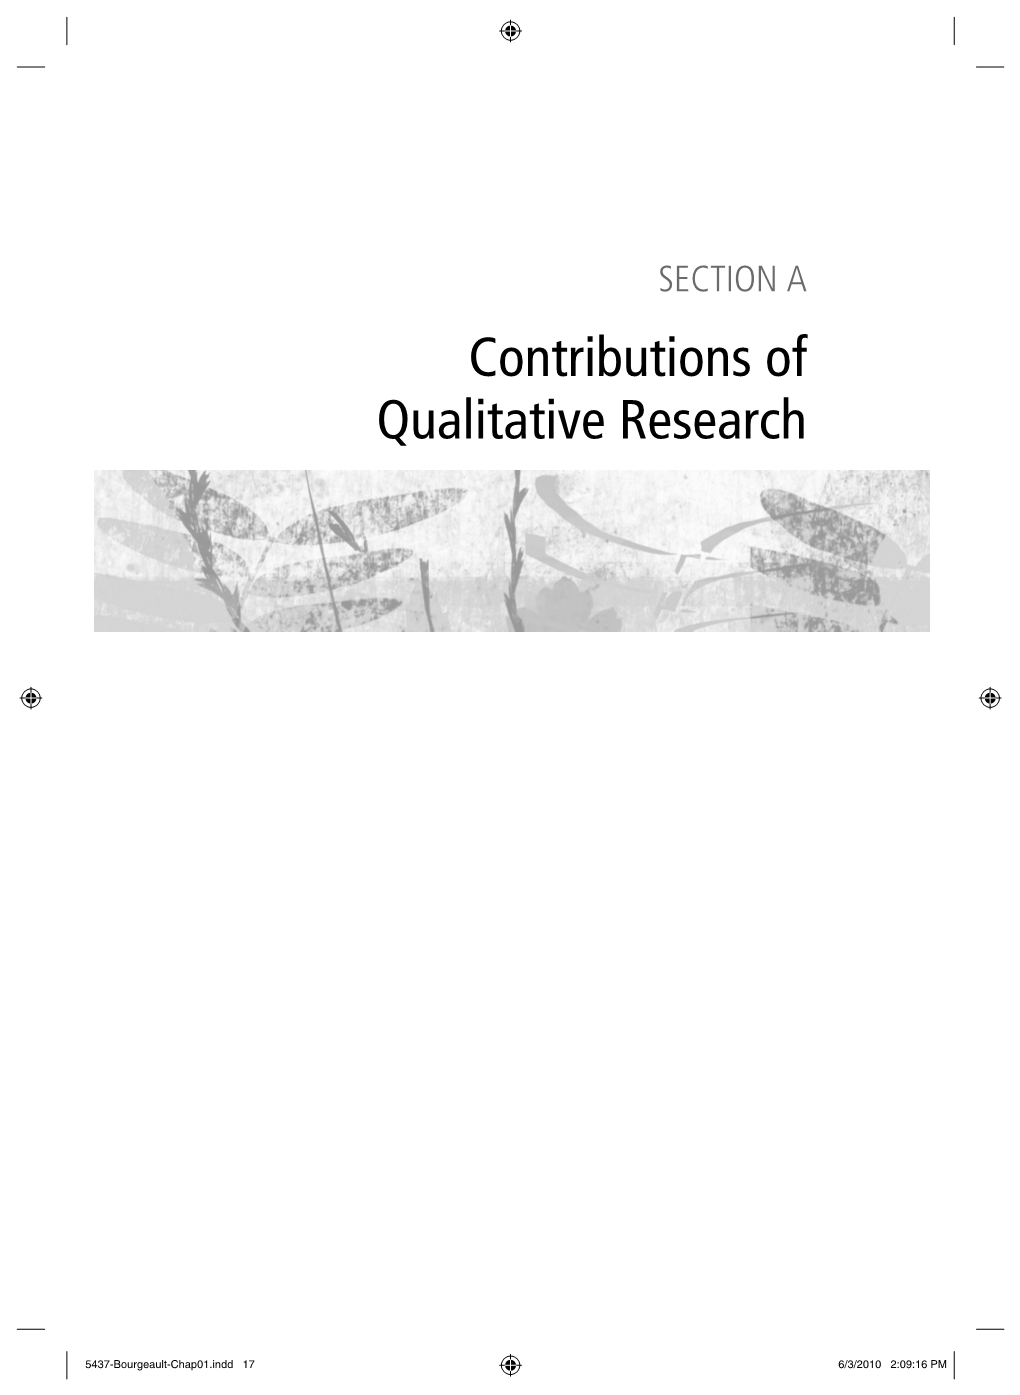 Contributions of Qualitative Research